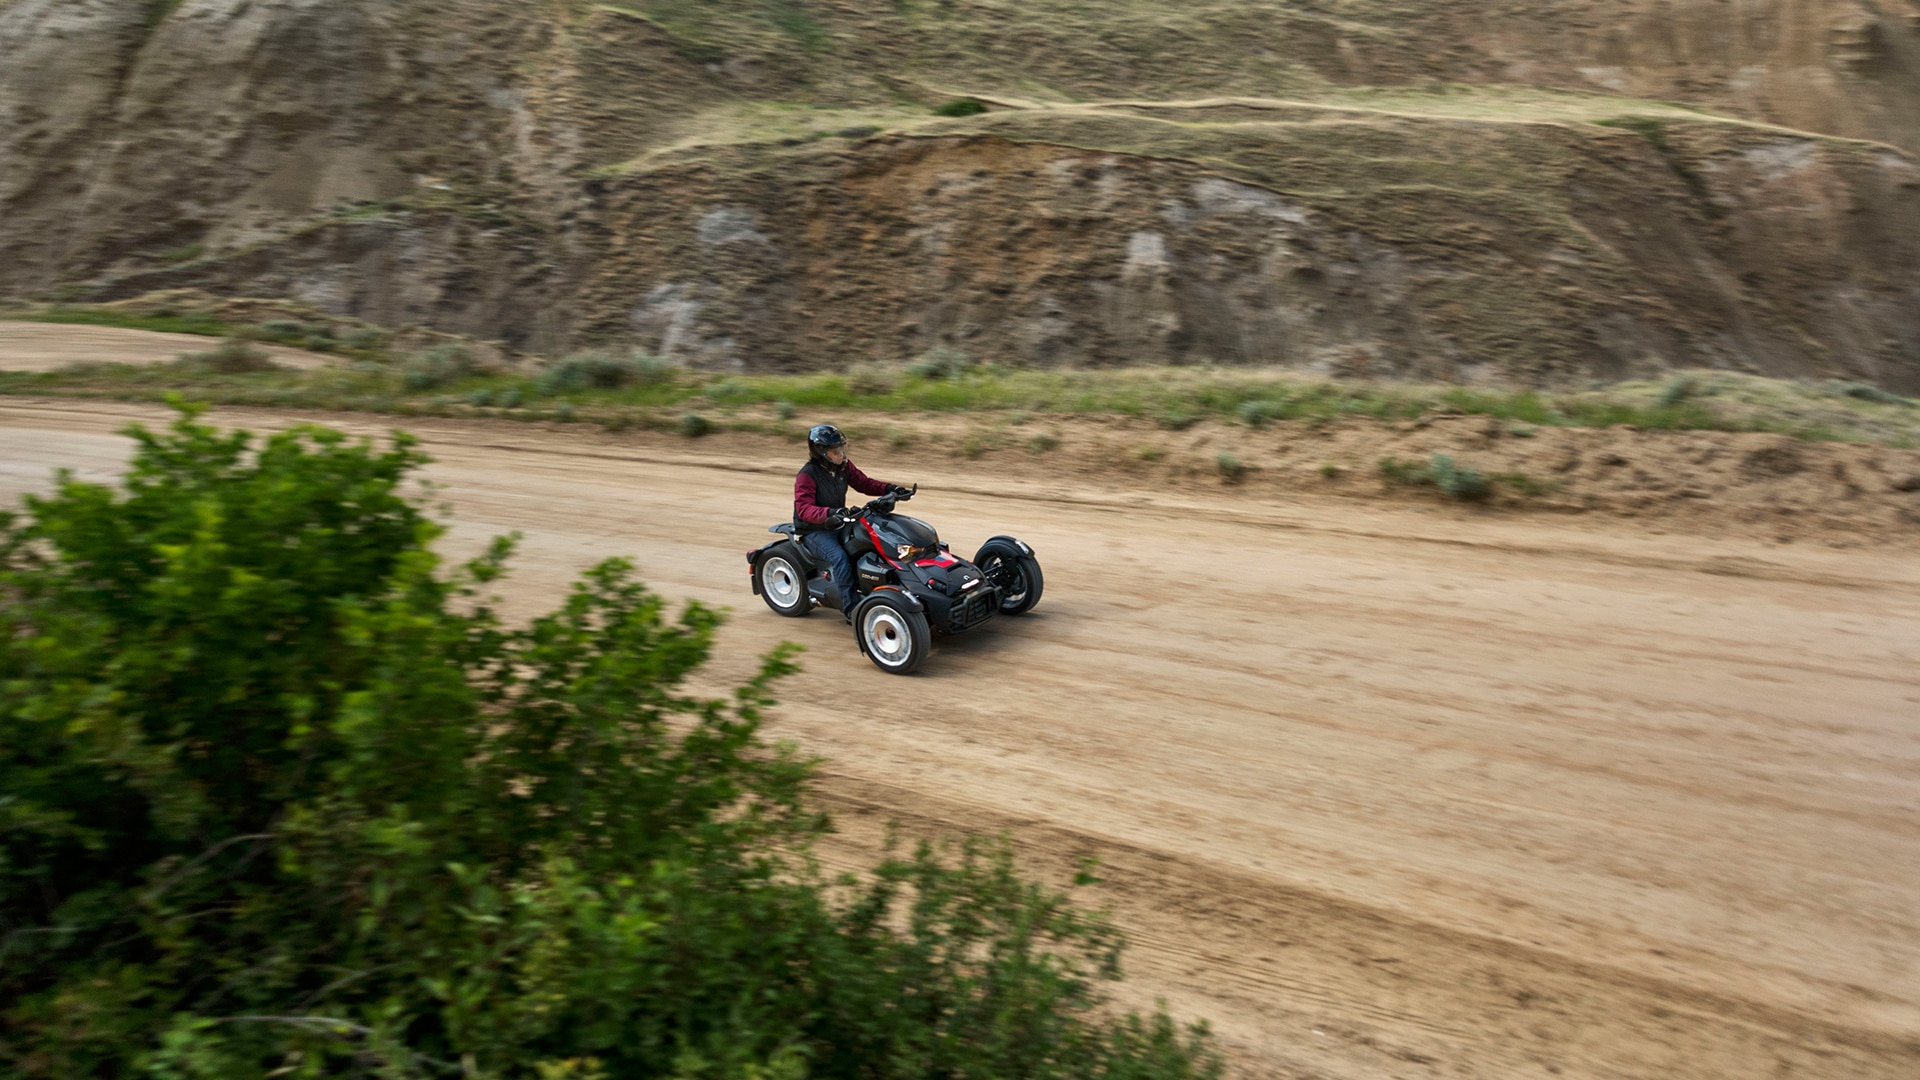 Can-Am 3-wheel motorcycle riding on a dirt road